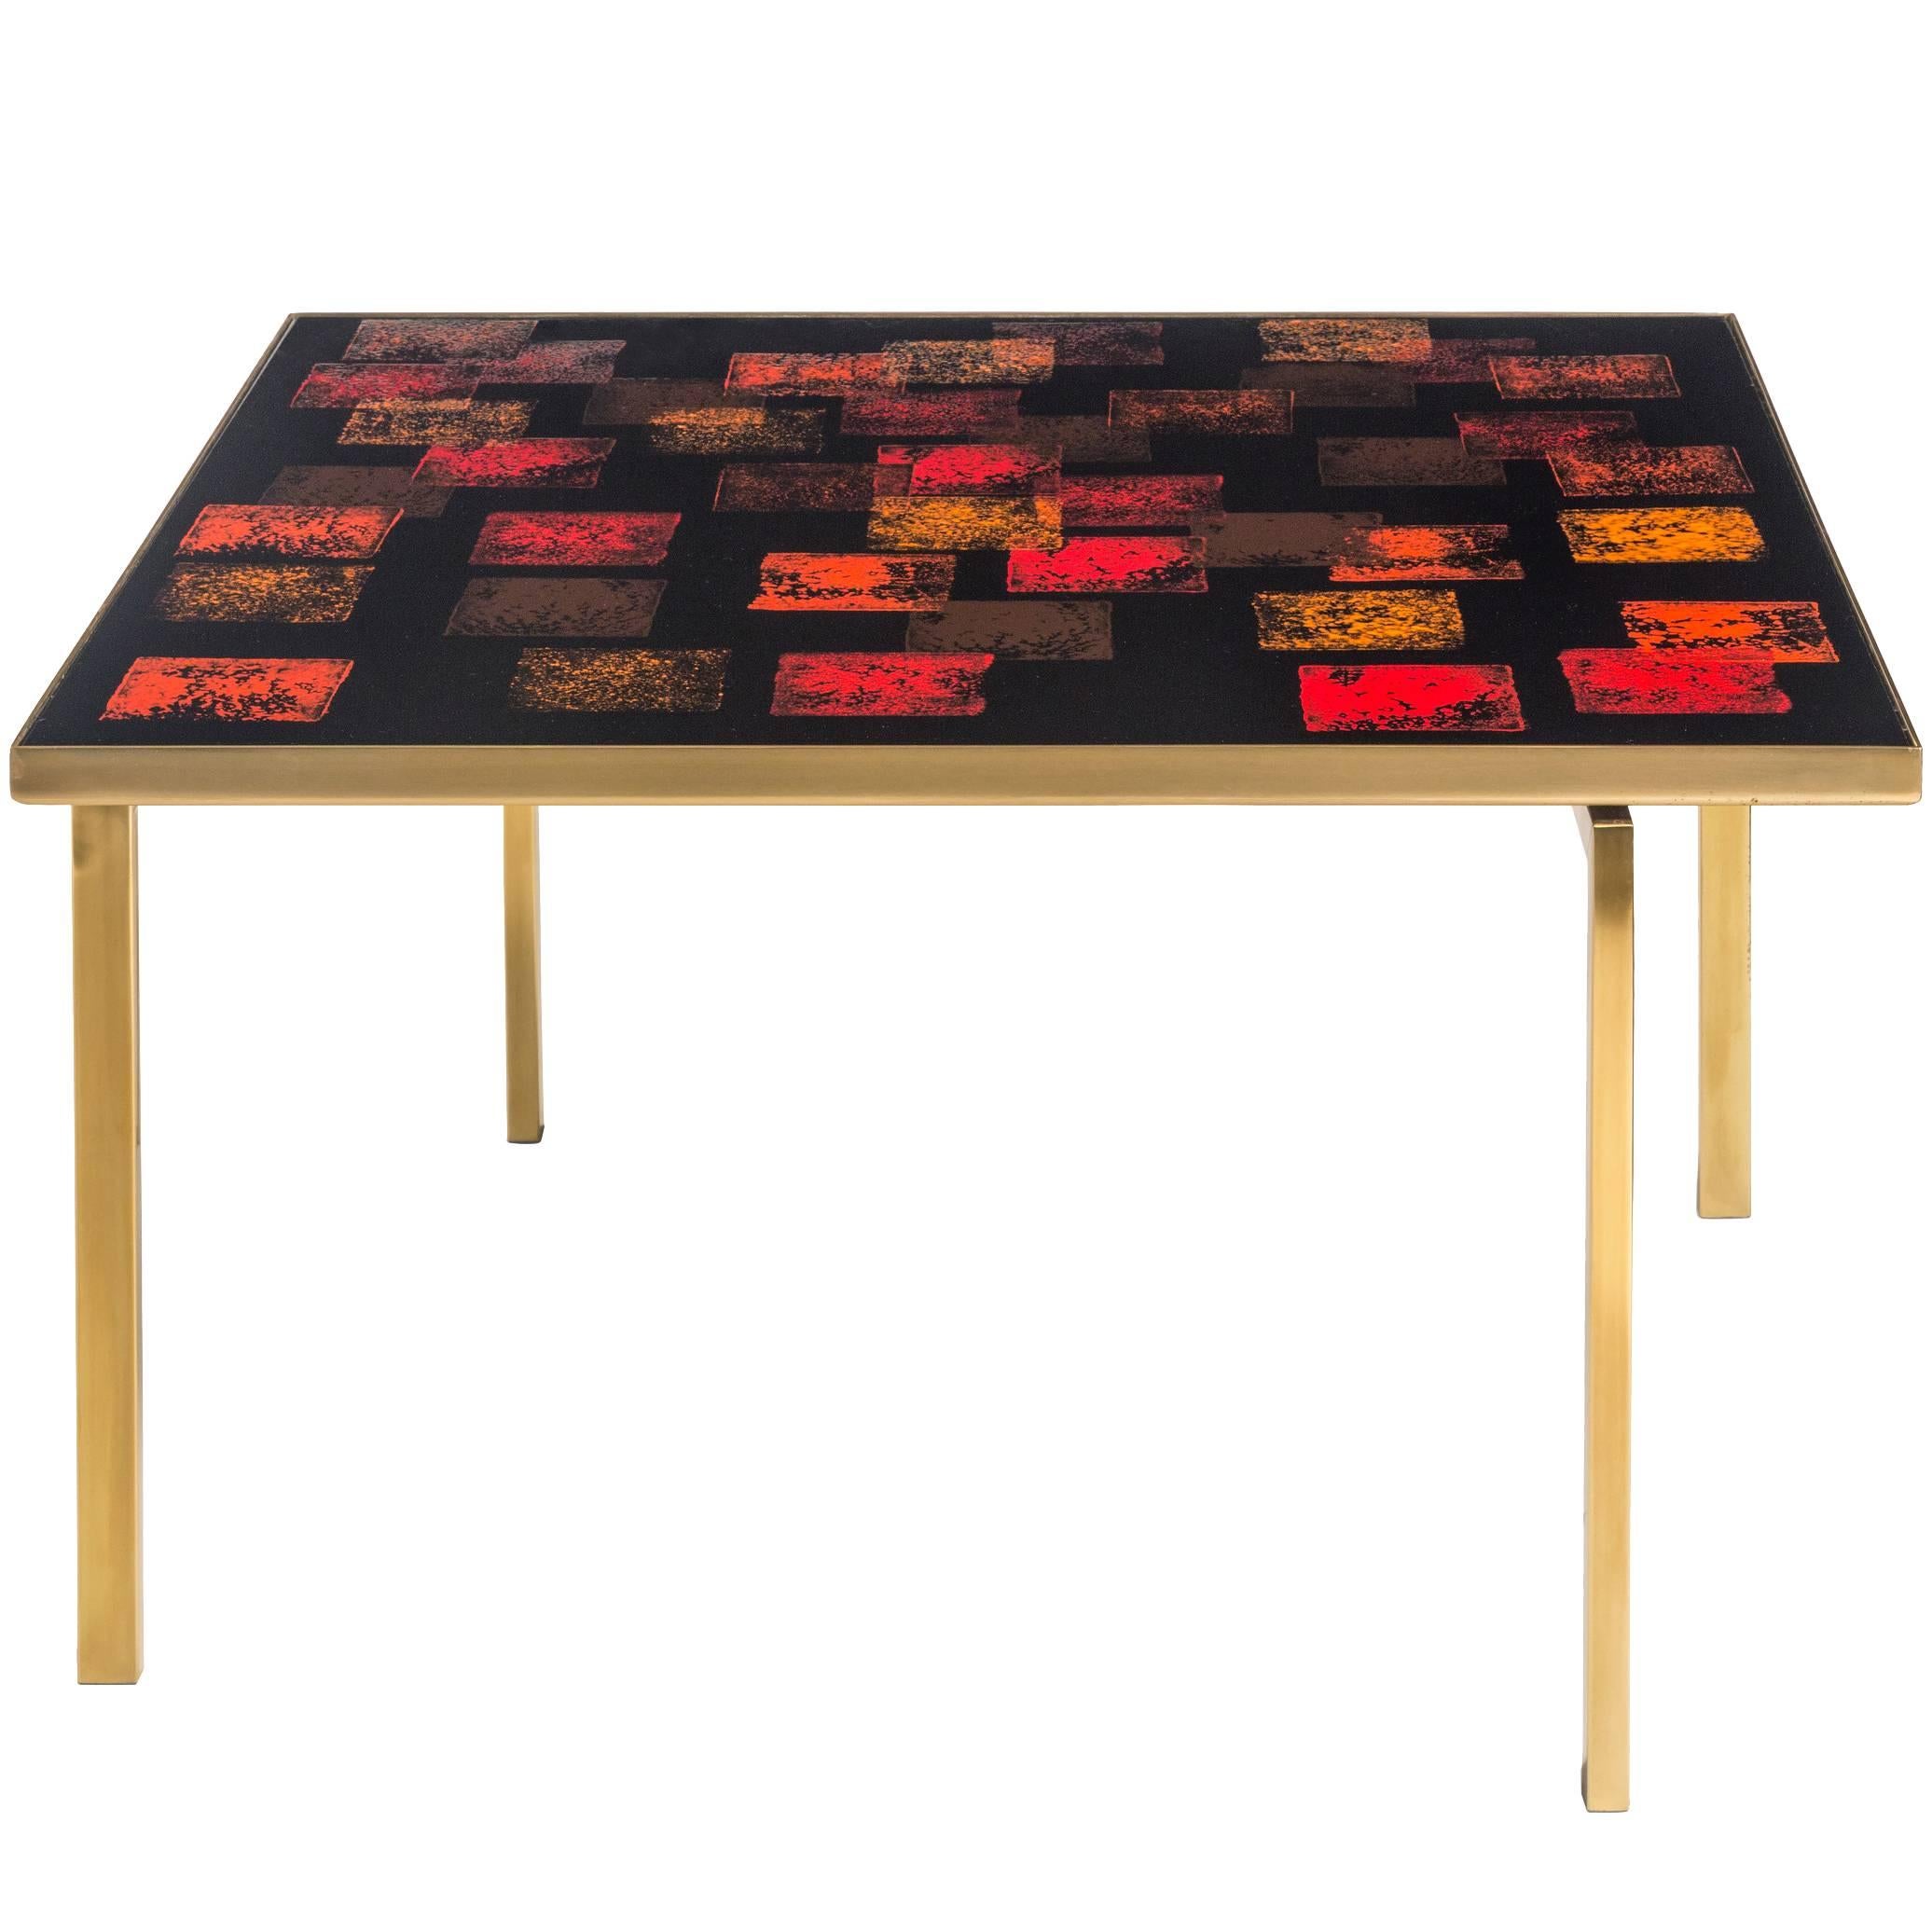 P. Törneman and Carl Bjørn for NK, Swedish Enamel and Brass Square Coffee Table For Sale